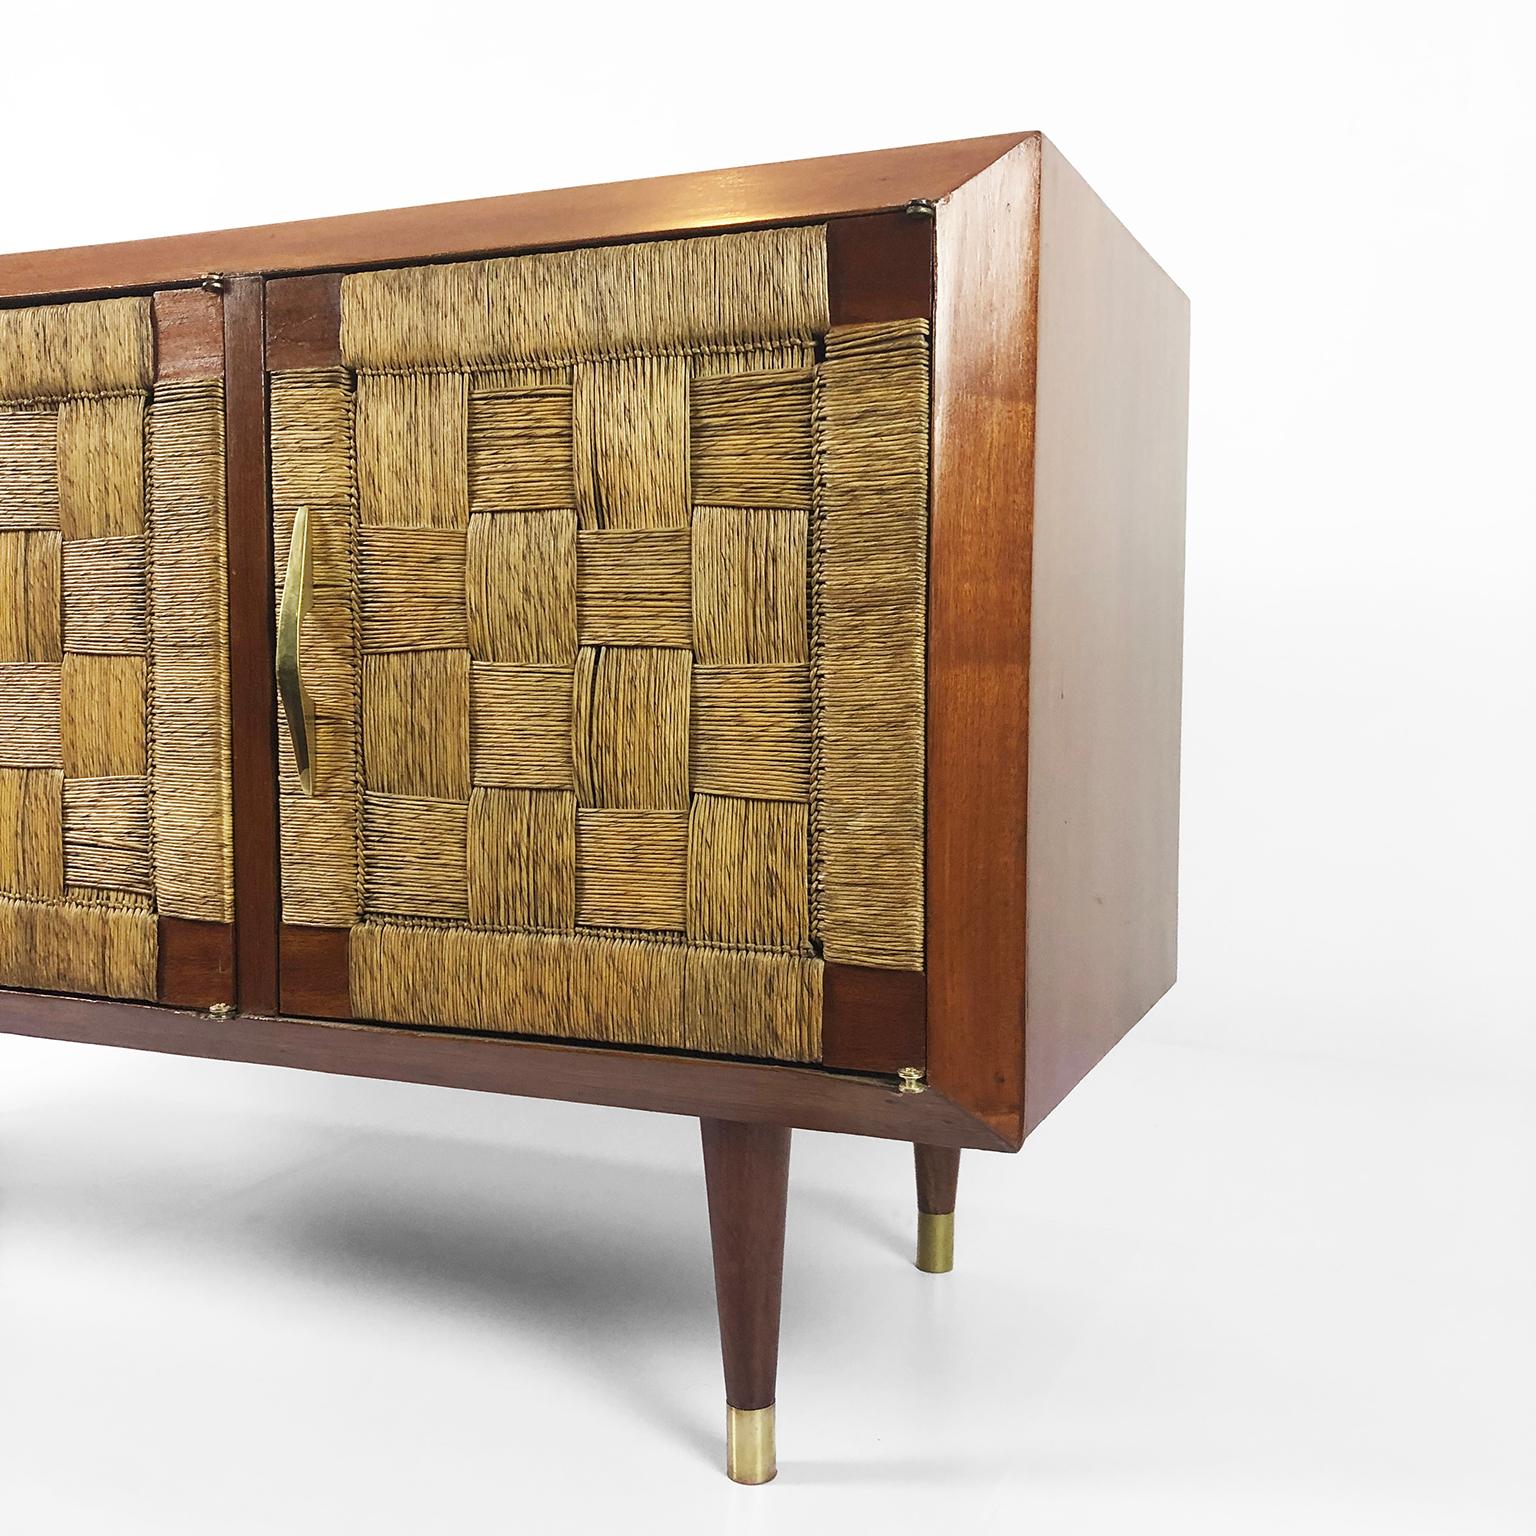 This piece of furniture has characteristics that suggest that it was designed by Edmond Spence for Industria Mueblera but does not include labels or brands, circa 1950.

A solid mahogany three-door credenza with brass legs and seagrass door